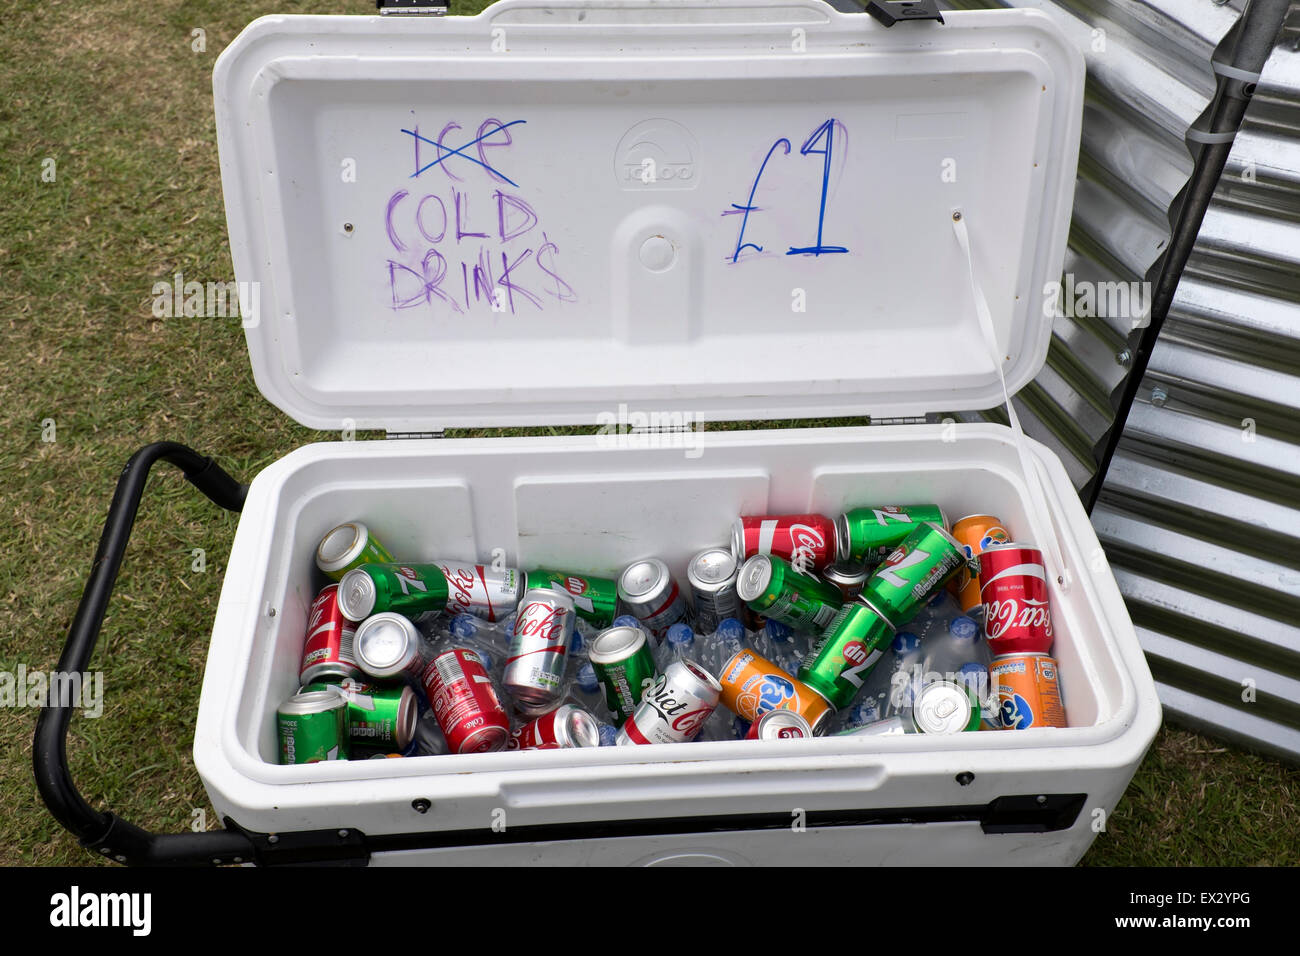 Not Ice Cold Drinks Cans Soda Pop Cooler Box Warm Stock Photo - Alamy